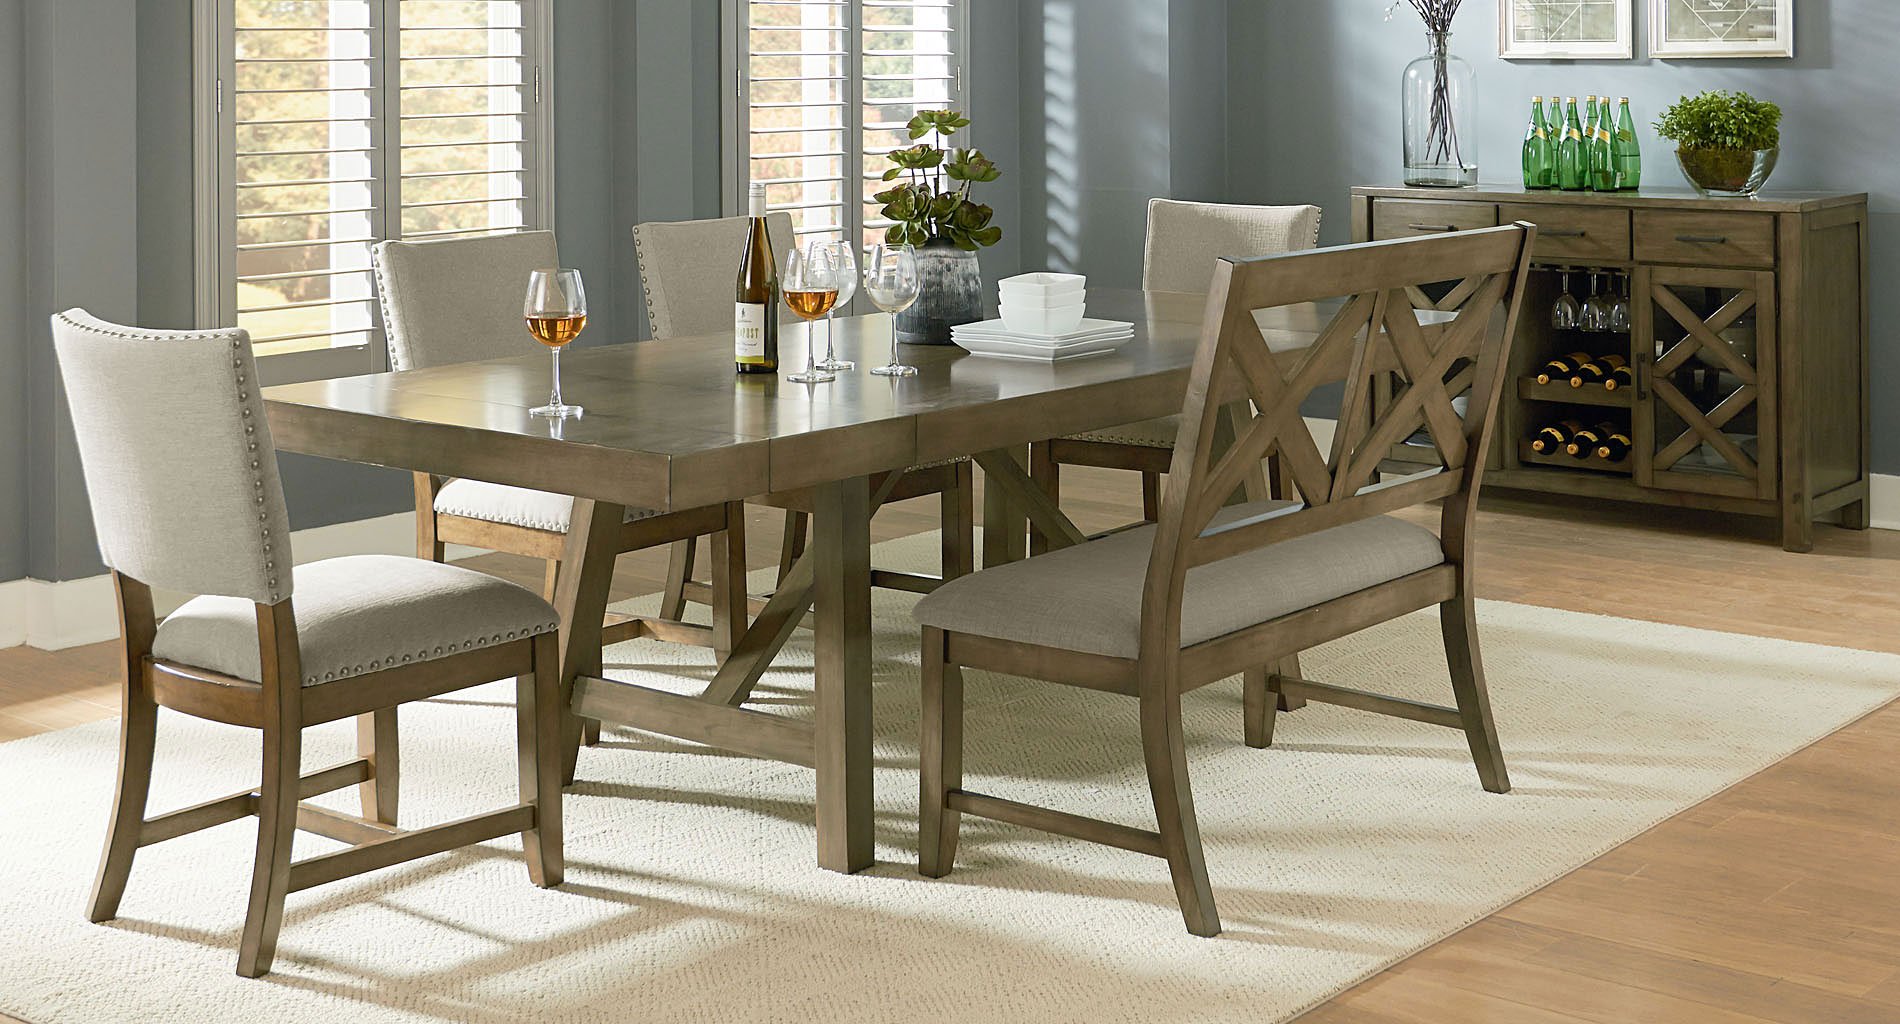 Omaha Dining Room Set W/ Bench And Upholstered Chairs (Grey) Standard